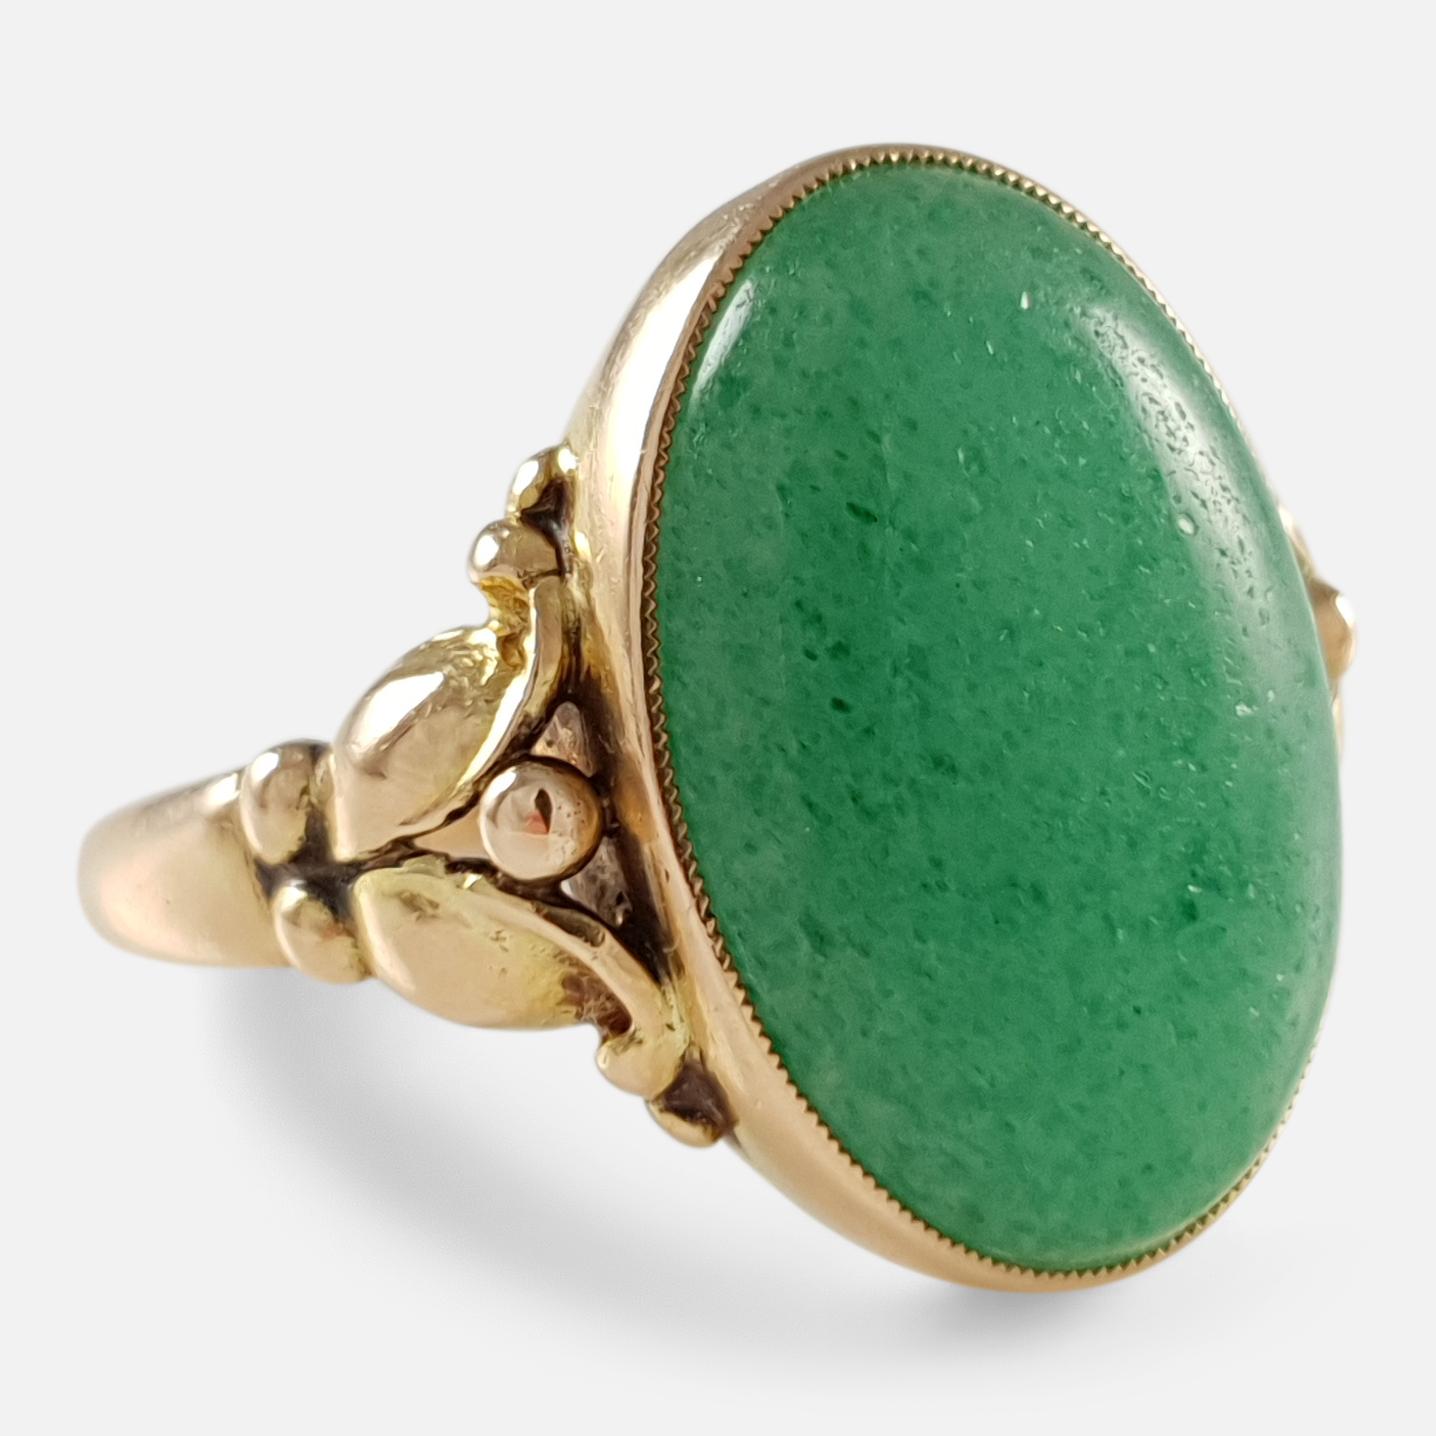 Description: - This is a superb early 20th century Danish Skønvirke 18 karat yellow gold and aventurine cabochon cut ring by Evald Nielsen. The aventurine is a lovely shimmering and glistening colour of green. The ring is stamped with the makers